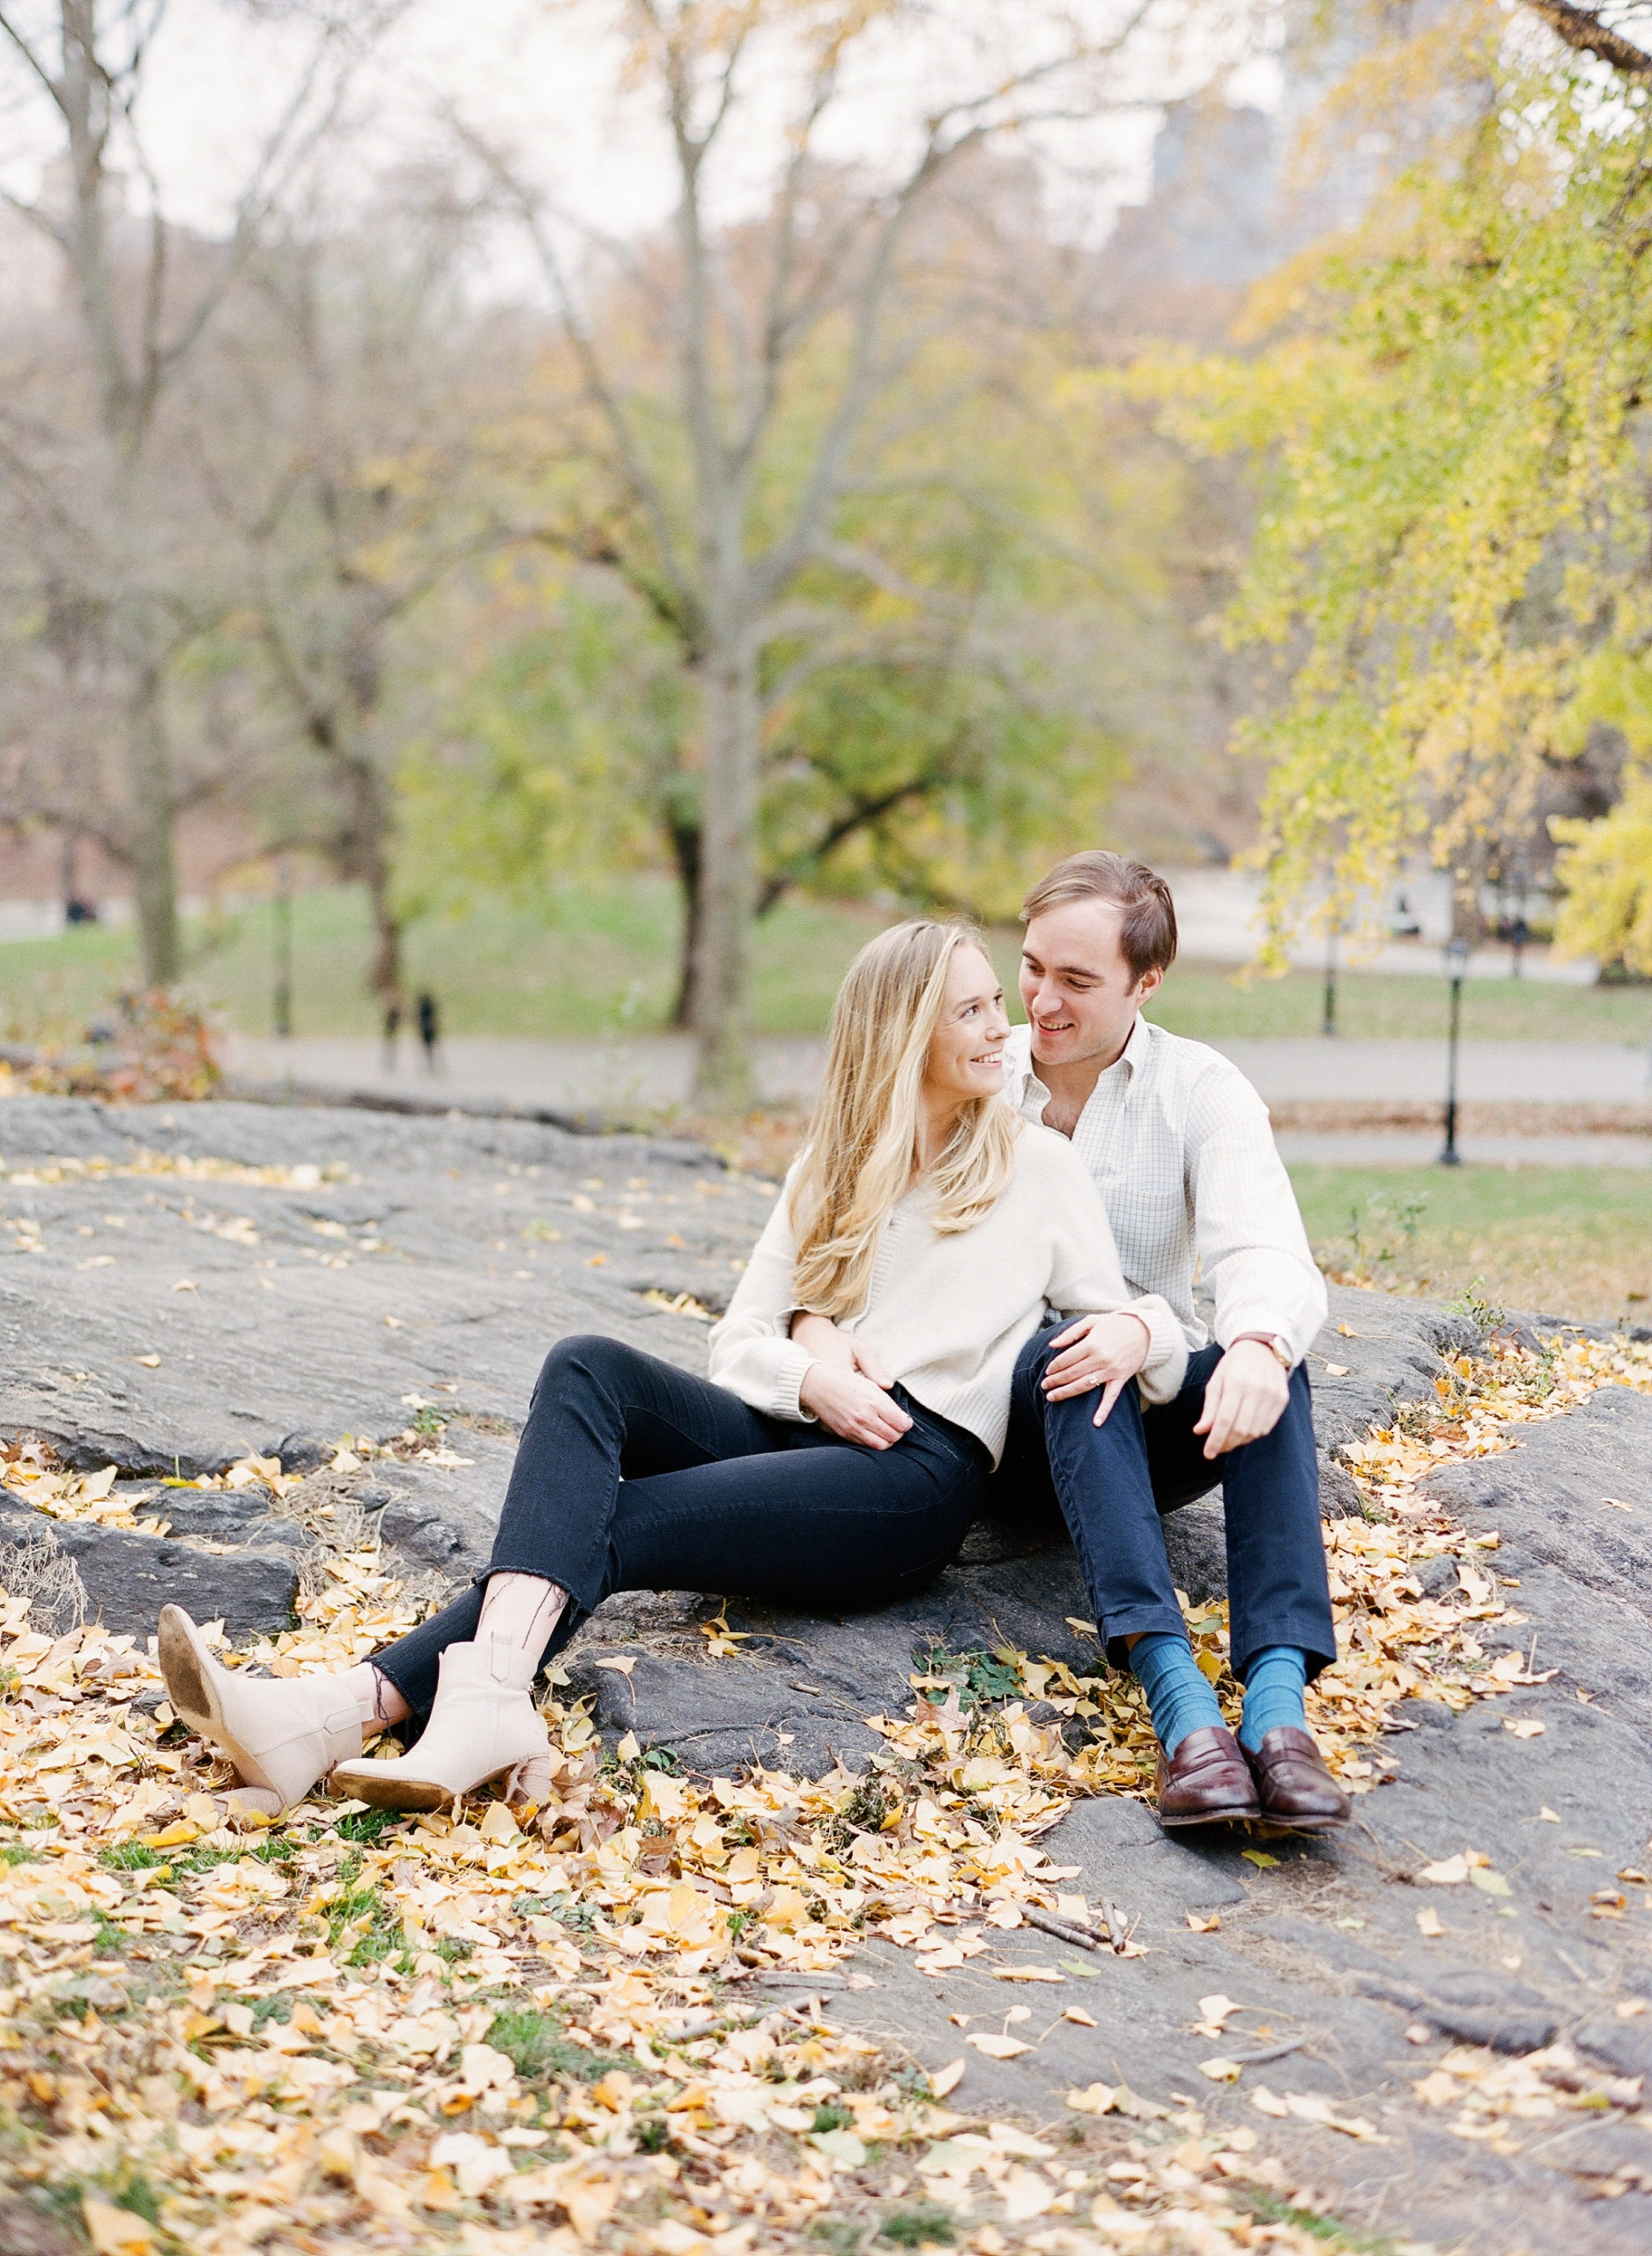 fall engagement photos in central park new york city